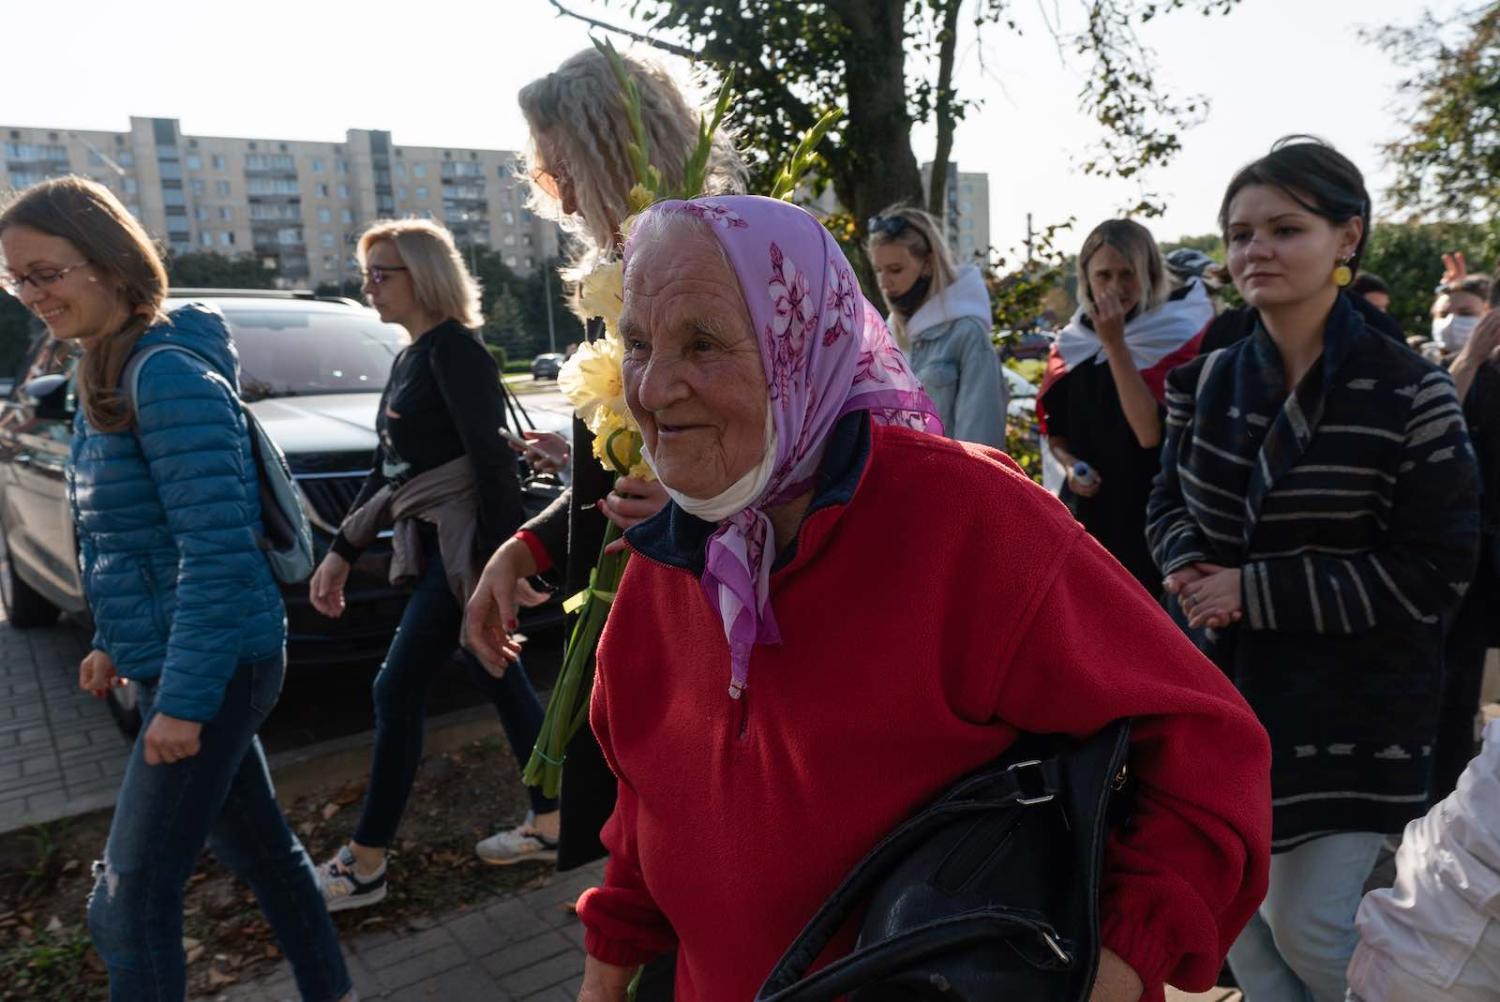 A elderly woman marches in a protest against the continued rule of president Alexander Lukashenko, 19 September 2020 in Minsk, Belarus (Jonny Pickup/Getty Images)